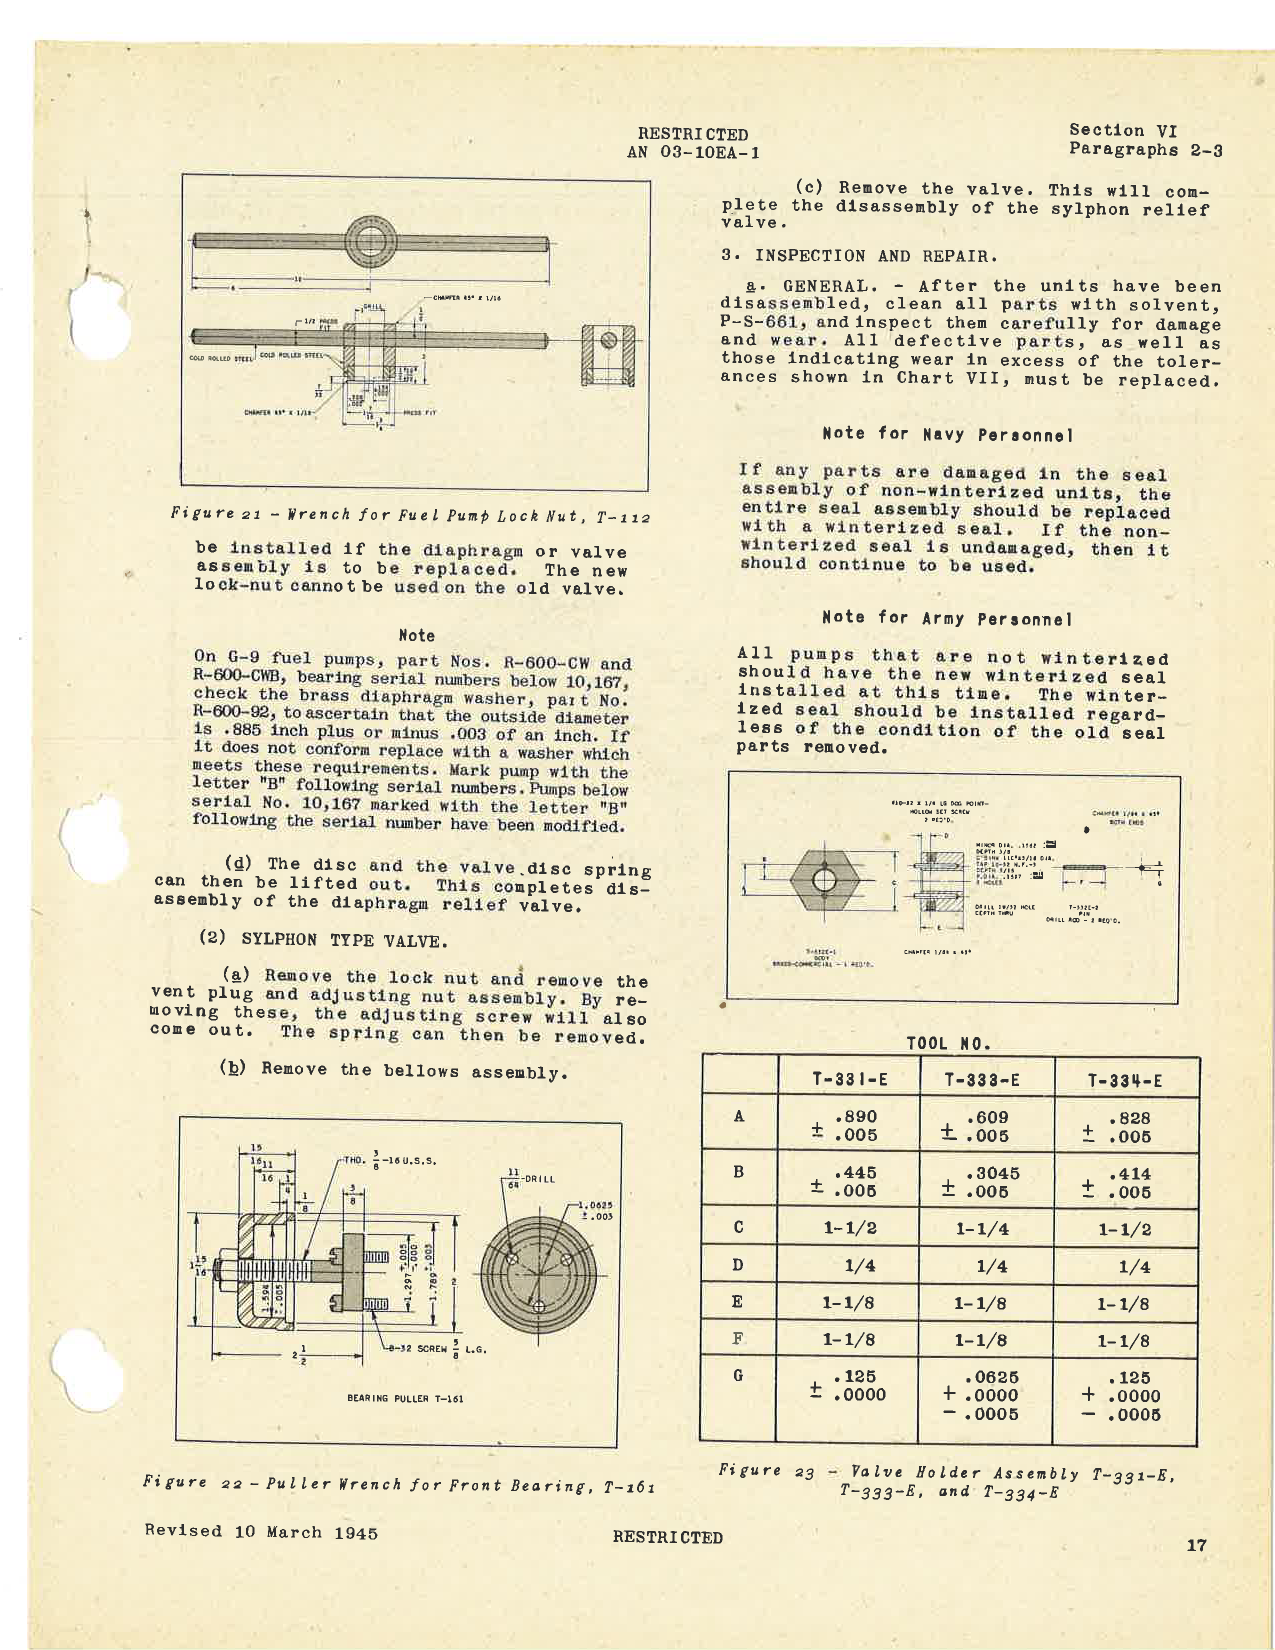 Sample page 5 from AirCorps Library document: Handbook of Instructions with Parts Catalog for Engine-Driven Fuel Pumps